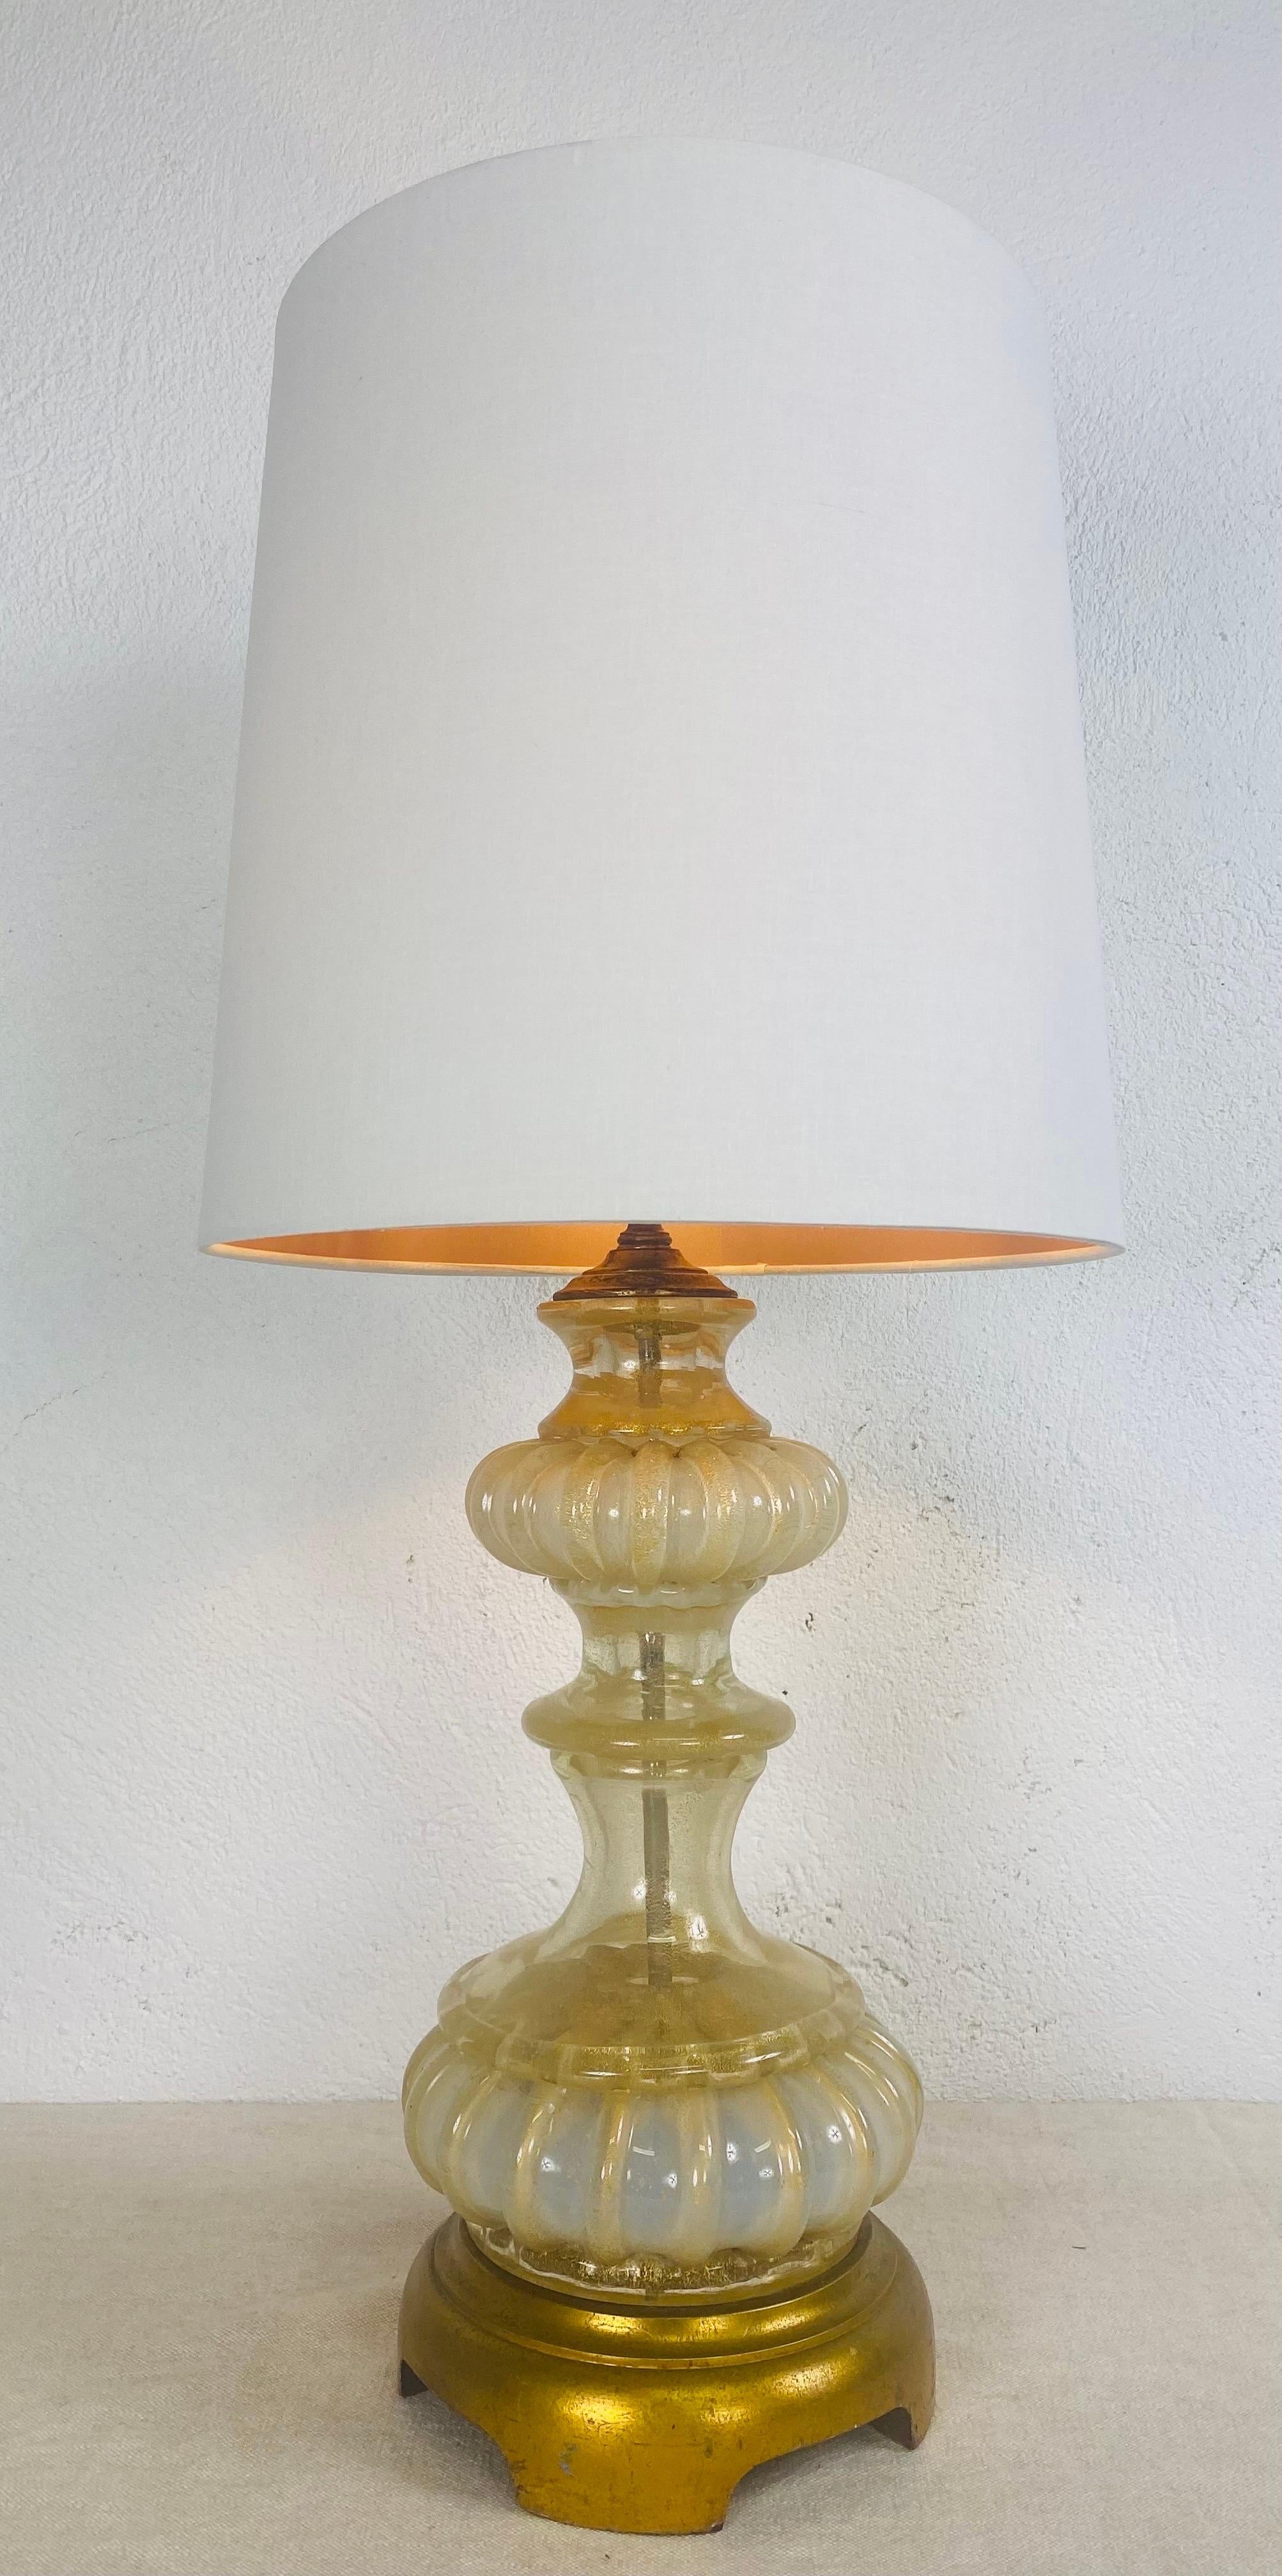 Midcentury Italian Murano Table Lamp by Barovier &Toso In Good Condition For Sale In Allentown, PA